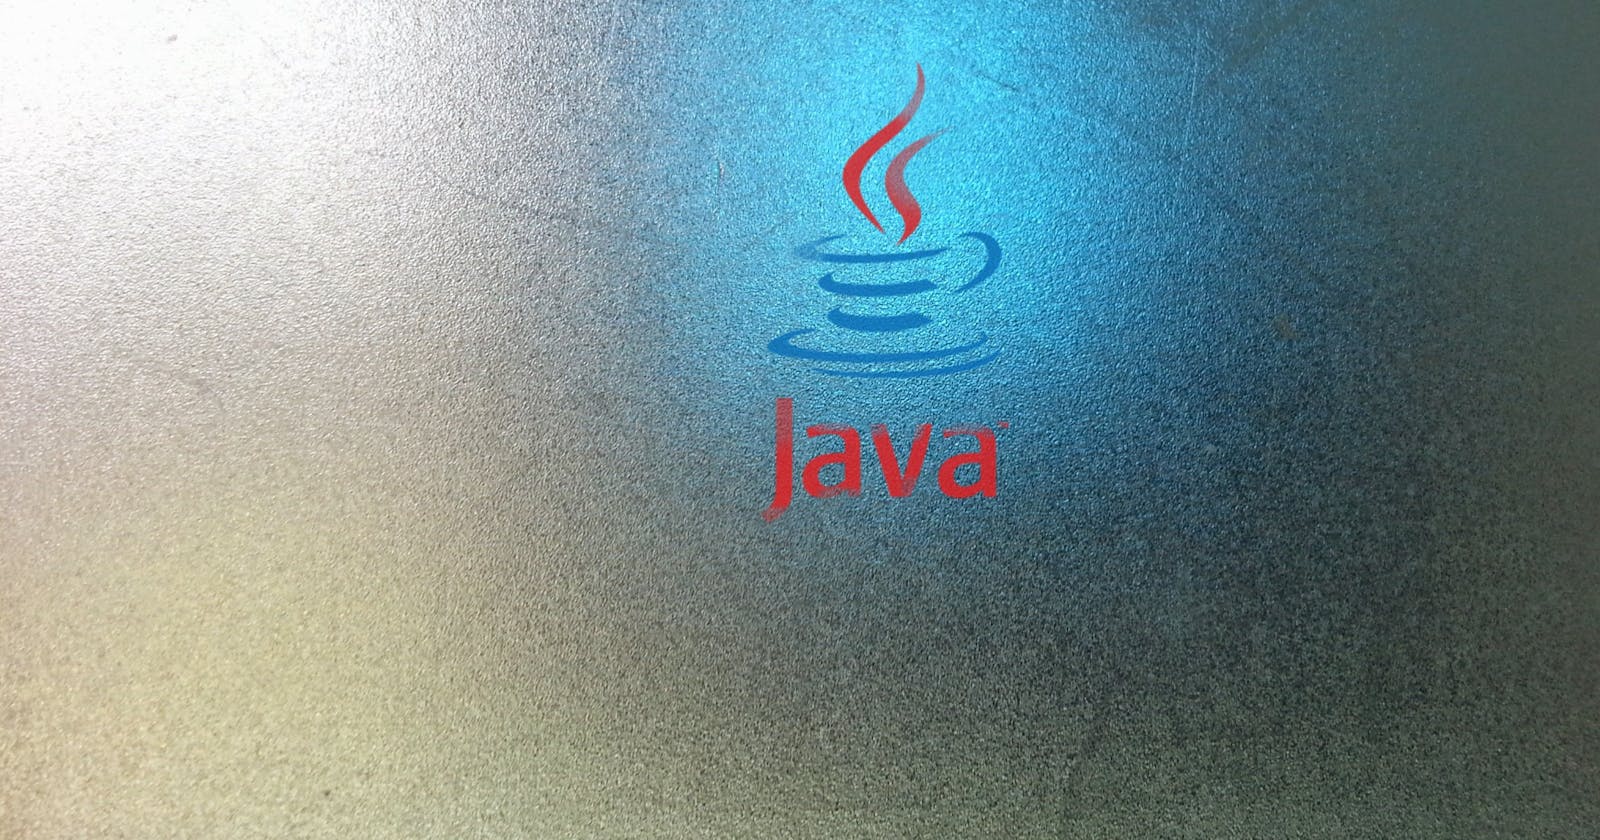 JAVA - A complete beginner's guide